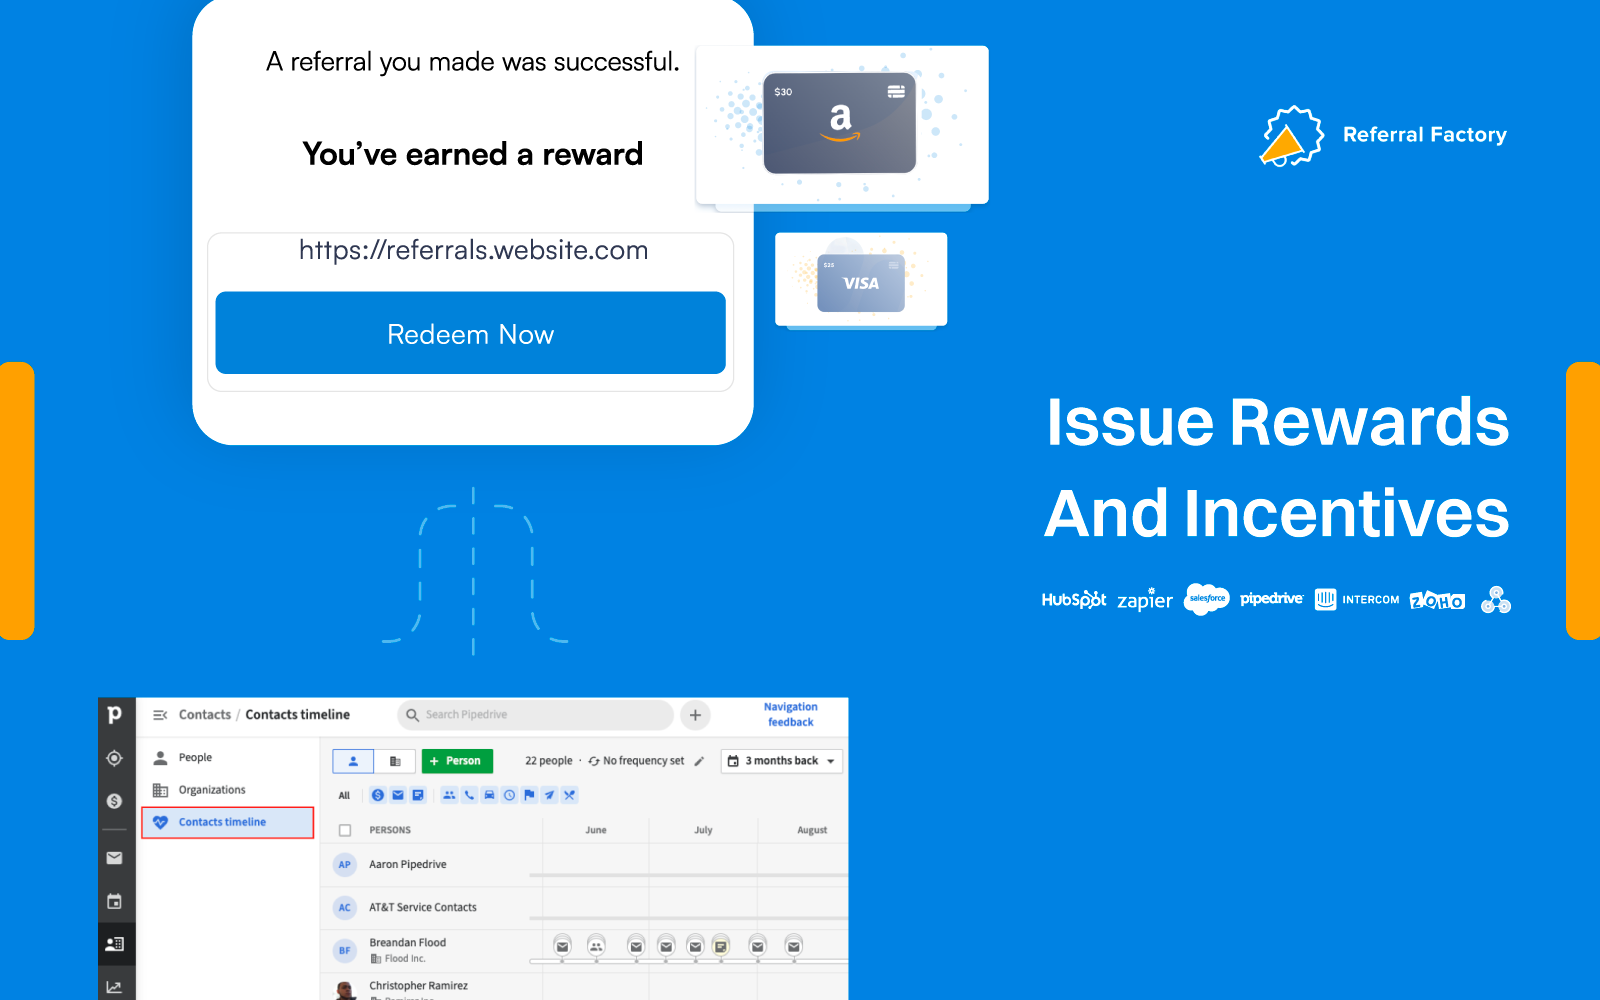 Automate your rewards and incentives for referrals. You can reward users for referring their friends with over 200+ vouchers, digital cash cards, charity donations and much more.